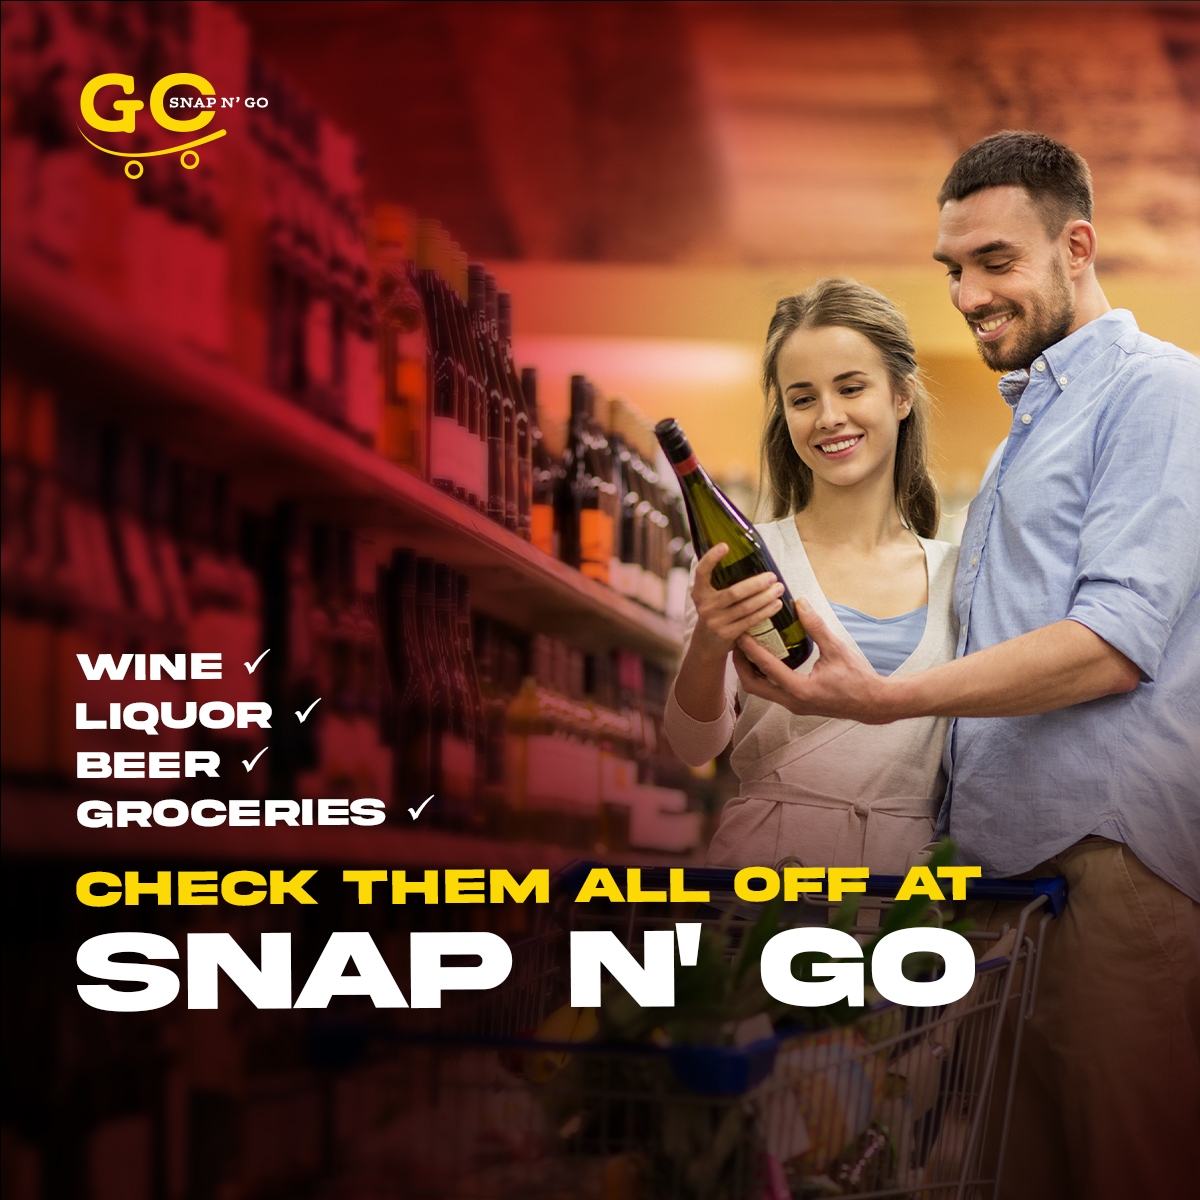 Why bother with multiple trips? SNAP N' GO is your one-stop shop for all your needs.

Drop by today!

#SnapNGo #GroceryShopping #EcoFriendlyShopping #OneStopShop #FoodieFinds